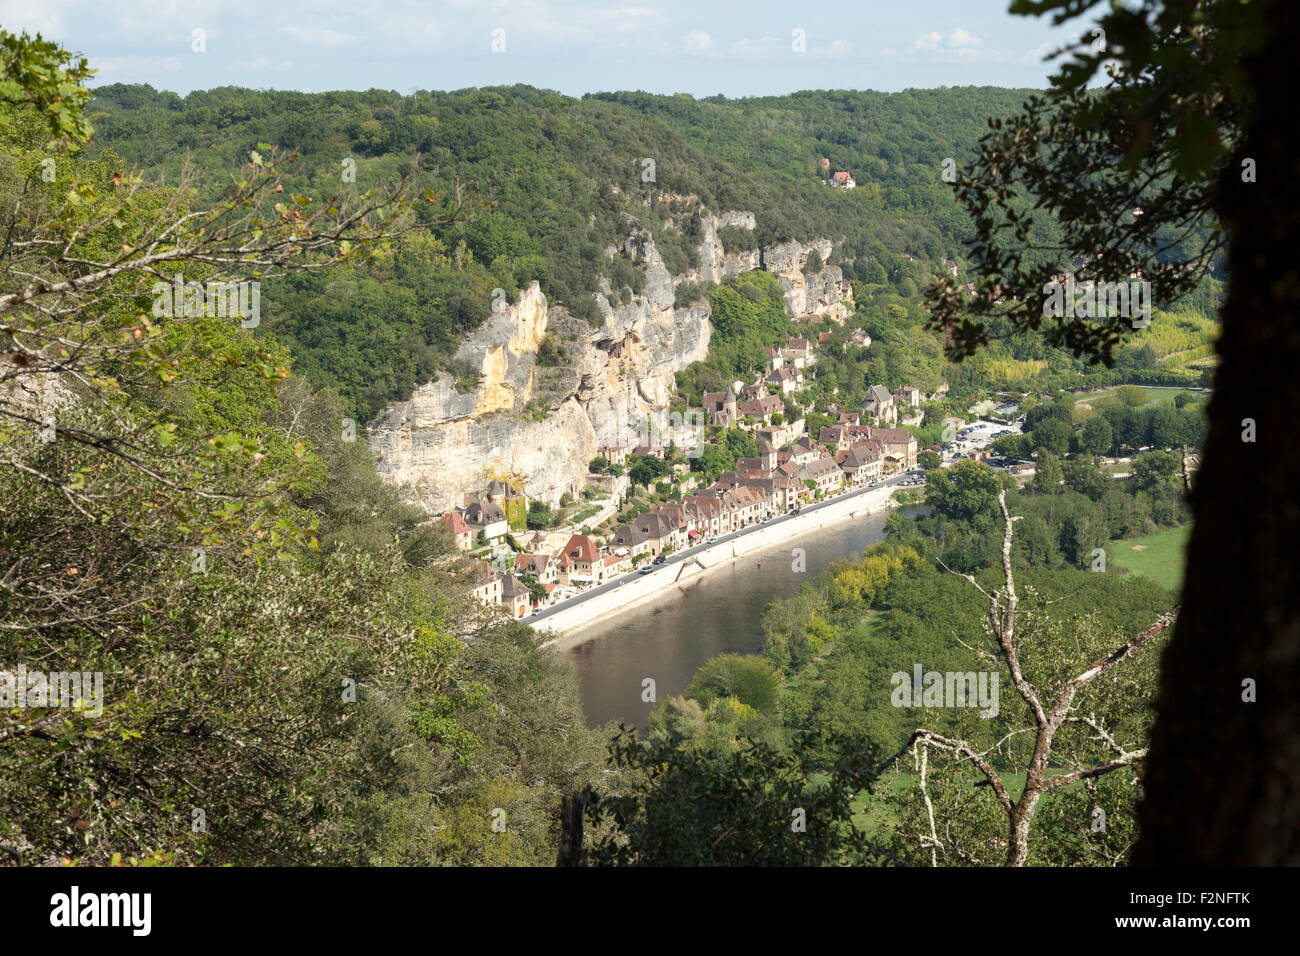 La Roque Gageac , one of the most beautiful villages of France huddled between the cliff and the Dordogne river. Stock Photo